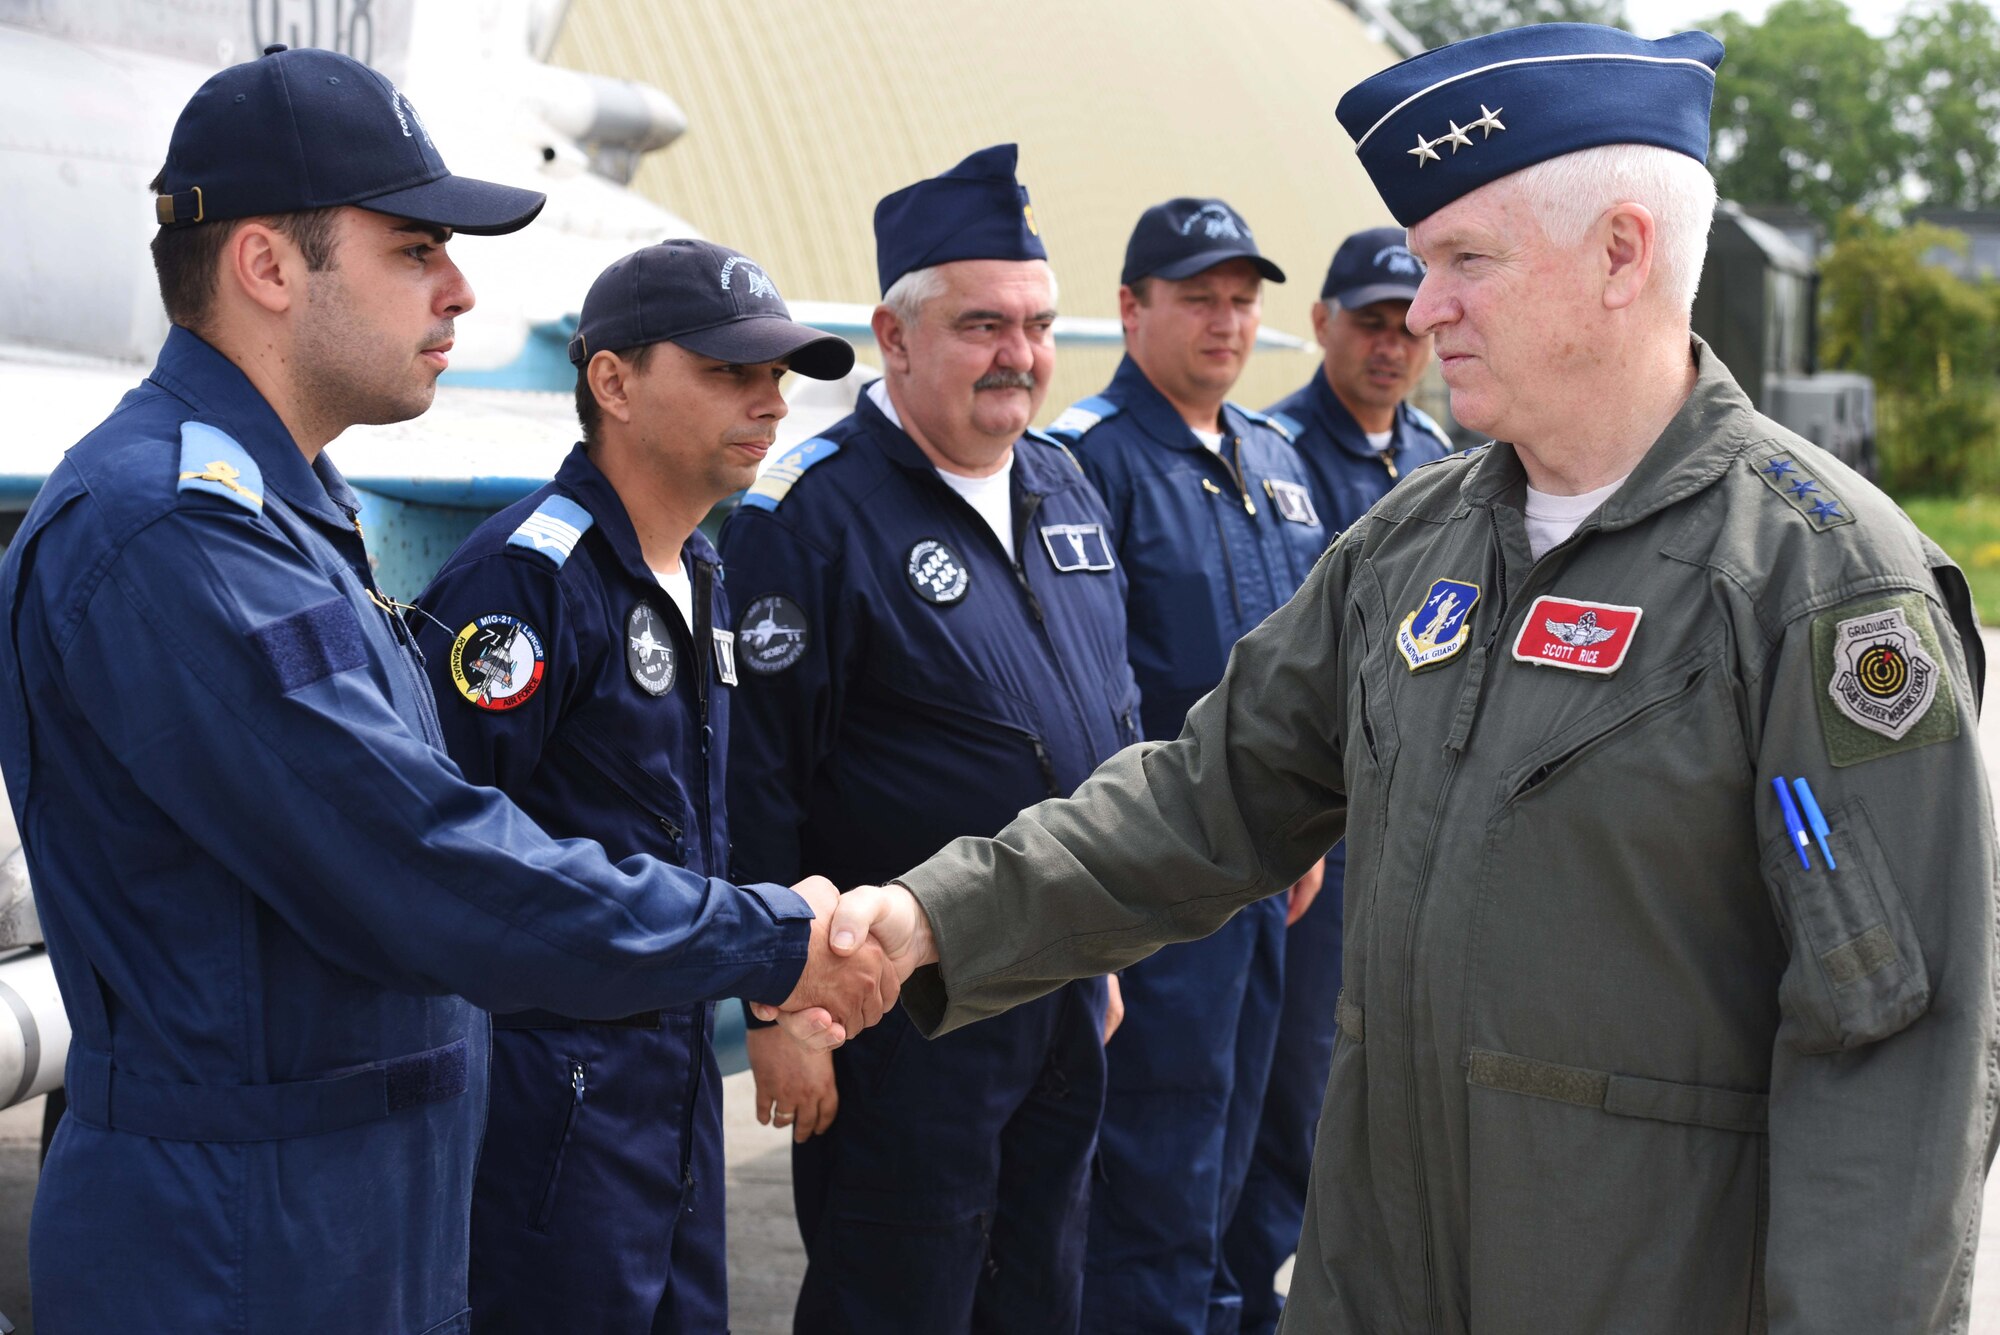 Director of the Air National Guard visits the troops